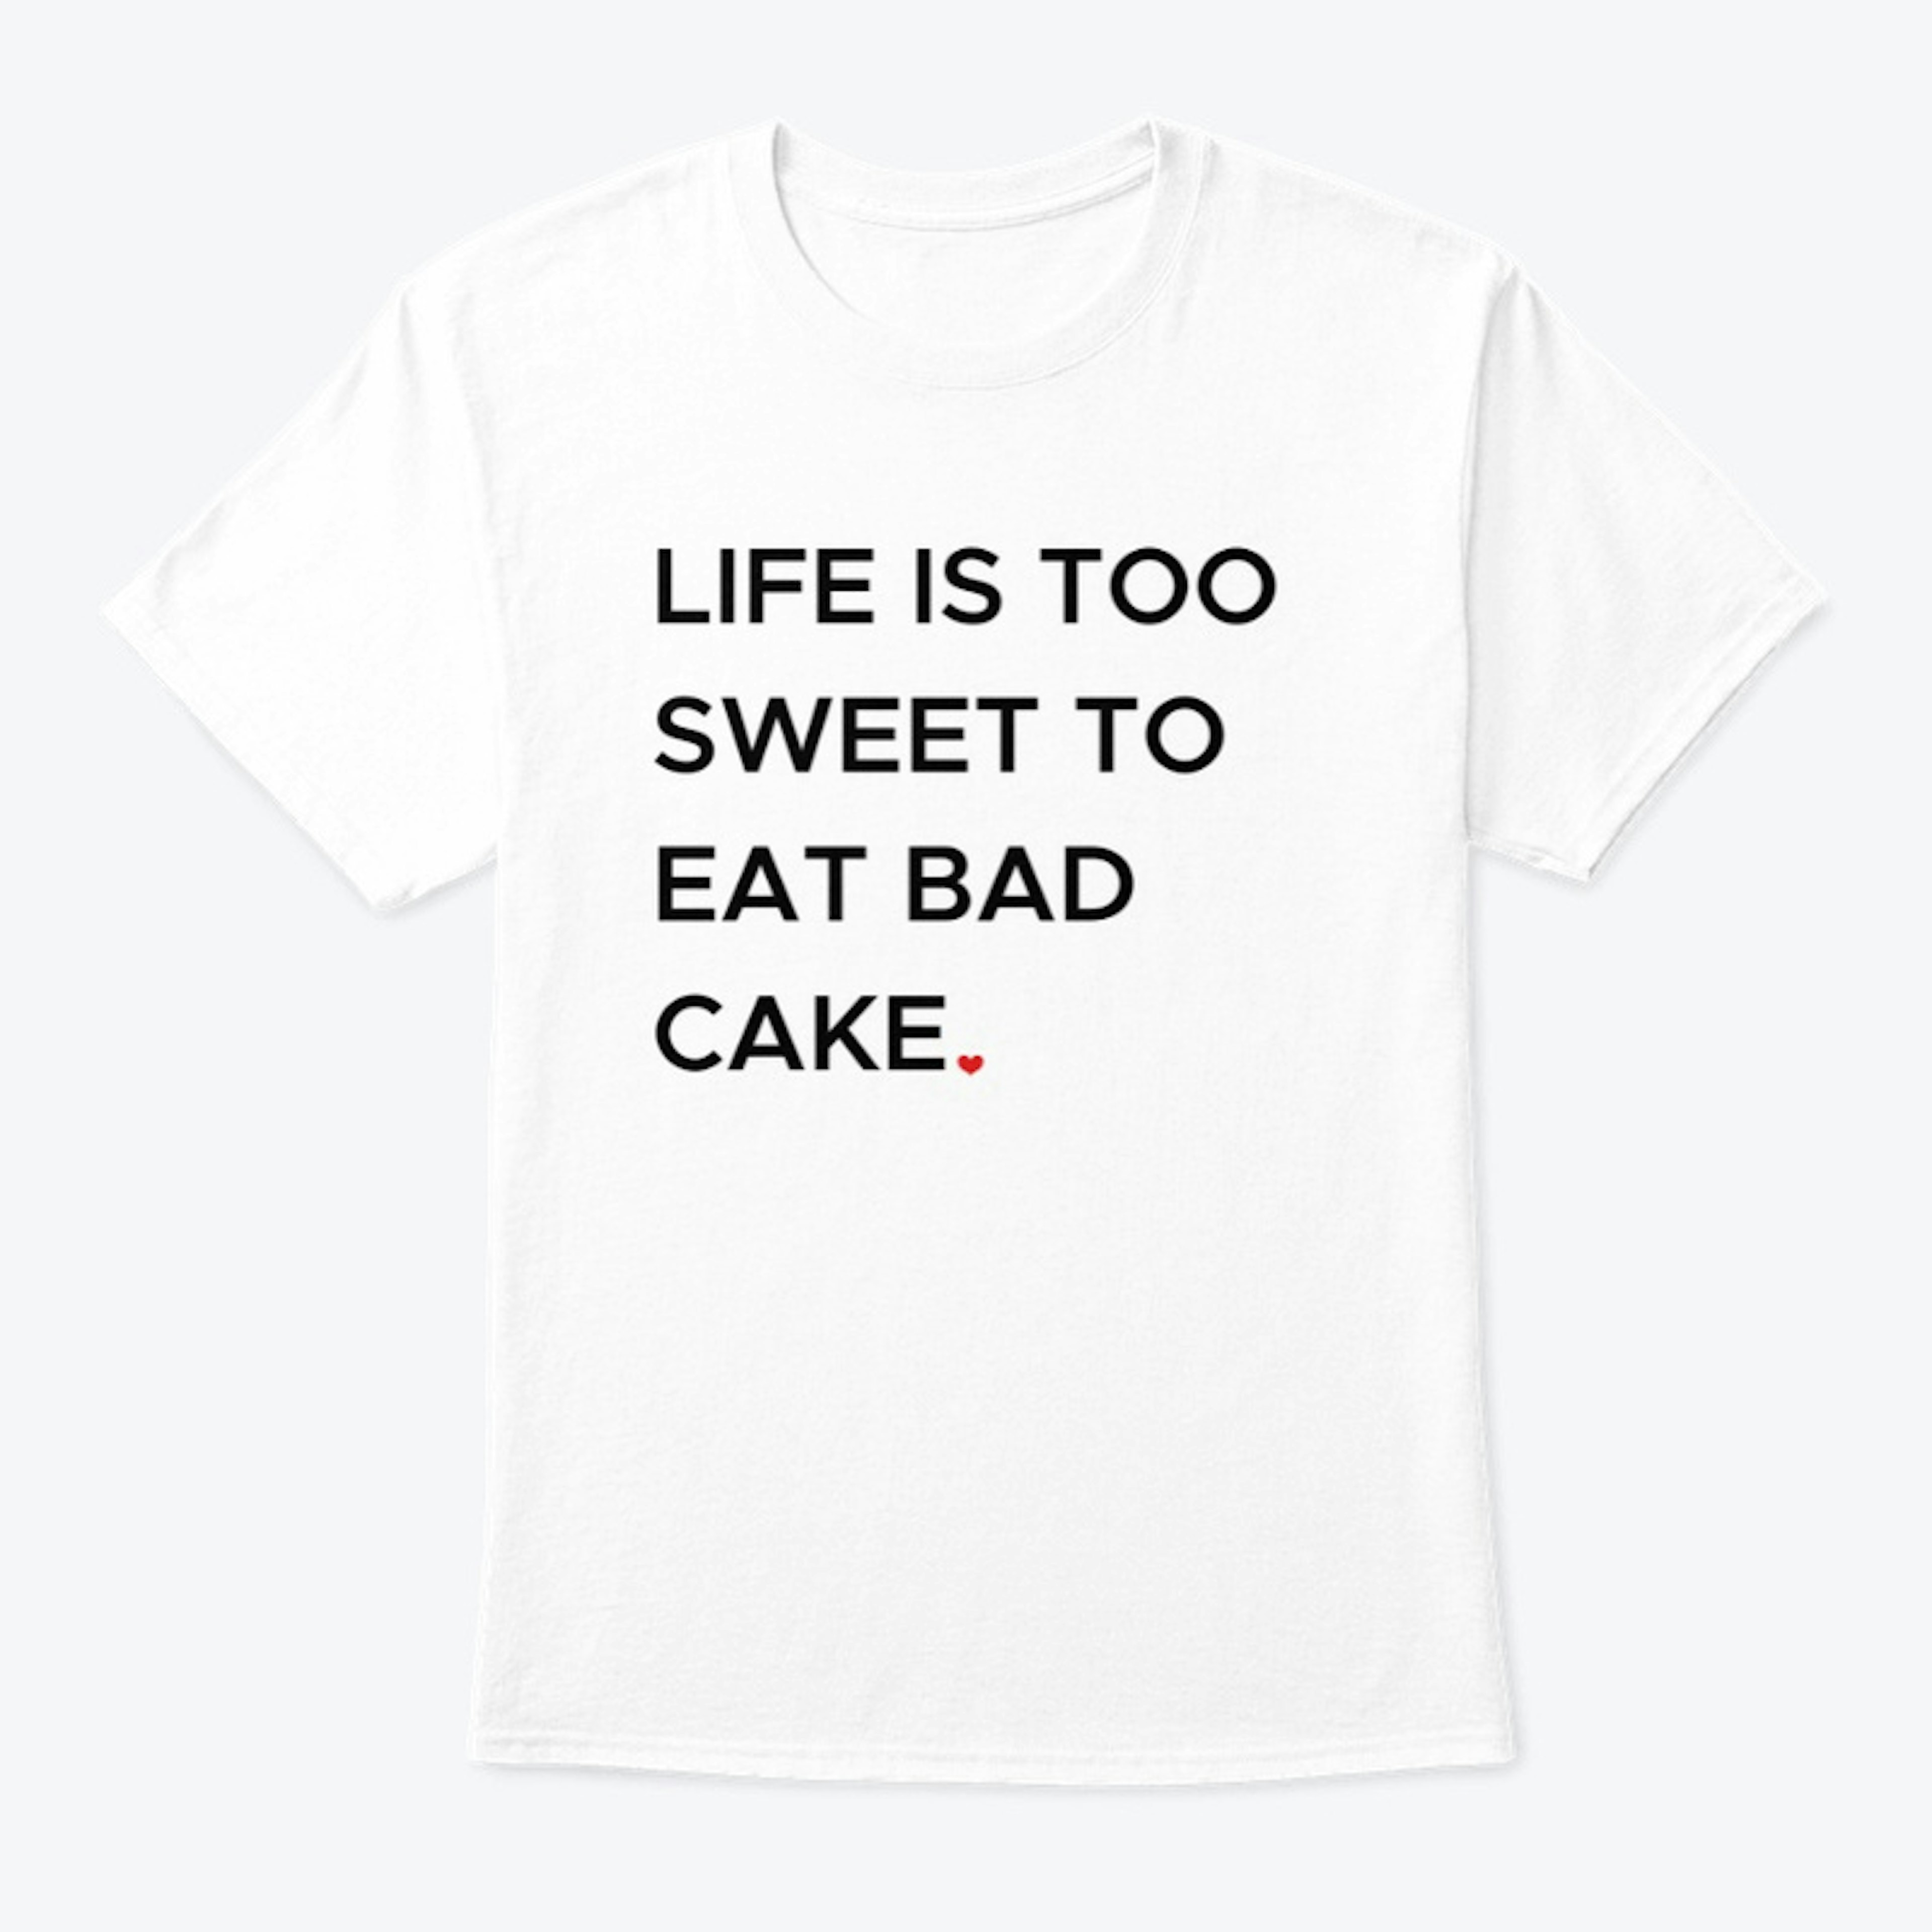 Life is too sweet (White T)